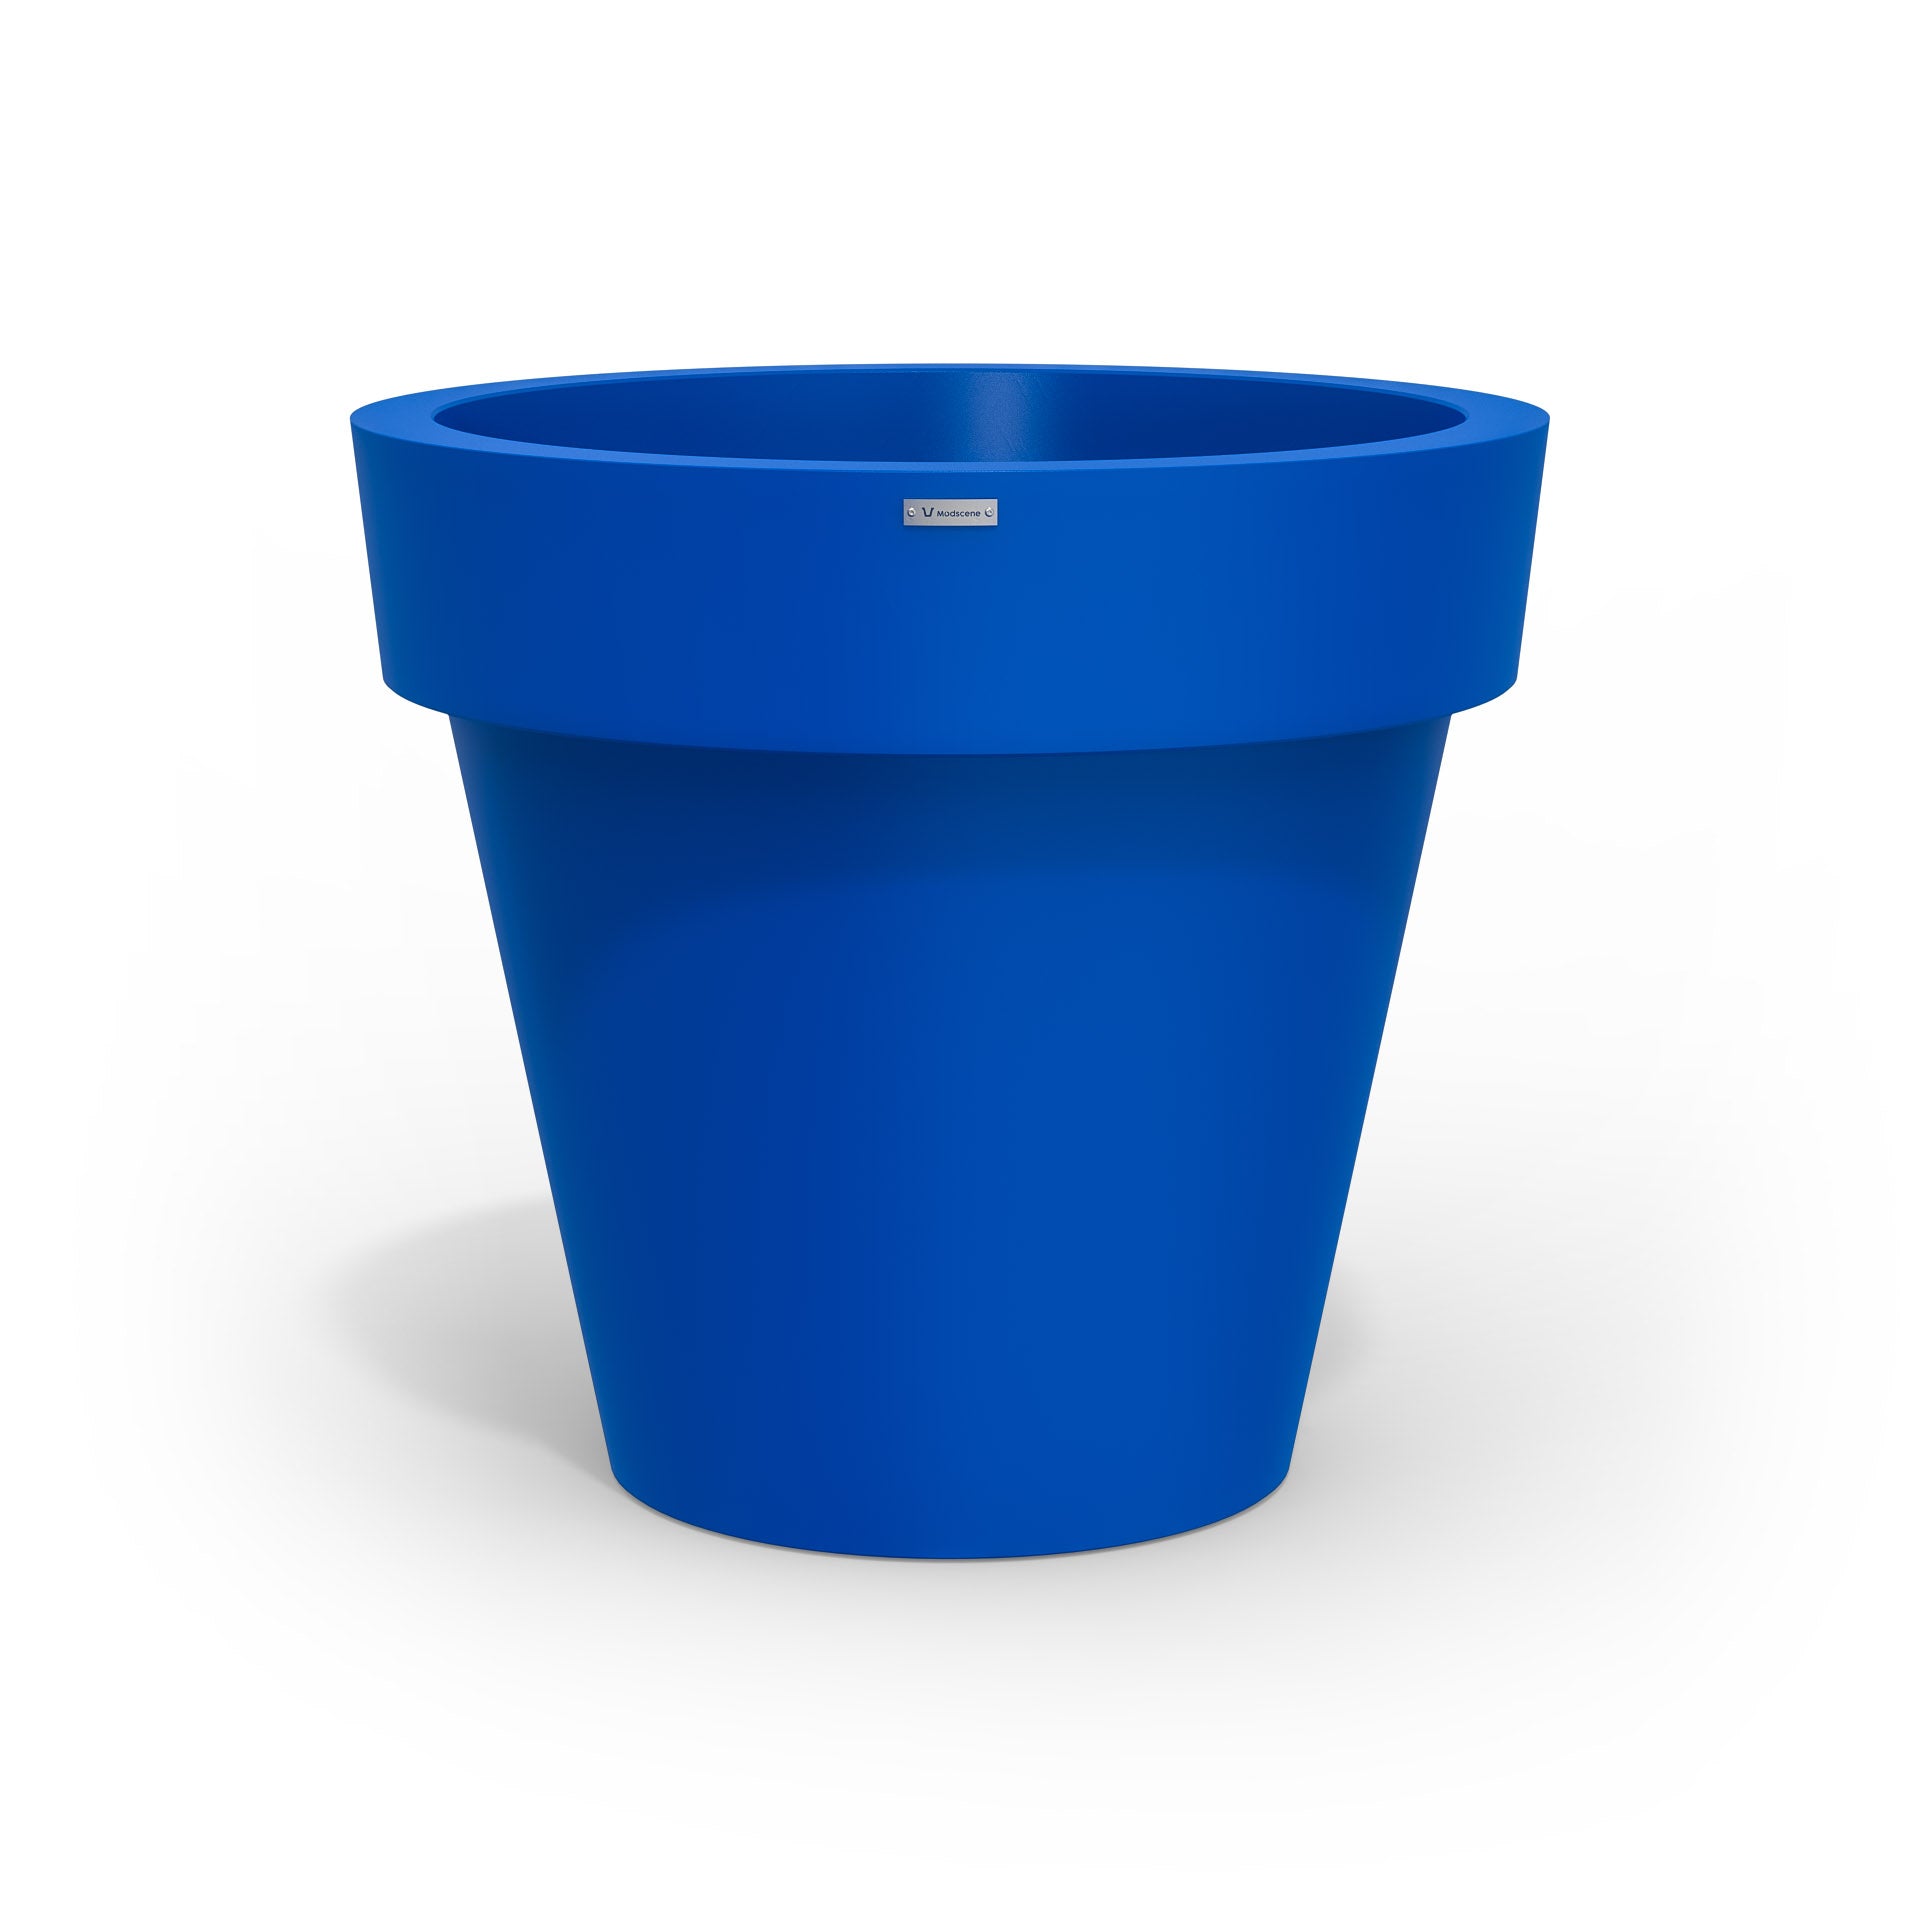 A large planter pot in a deep blue colour made by Modscene NZ.